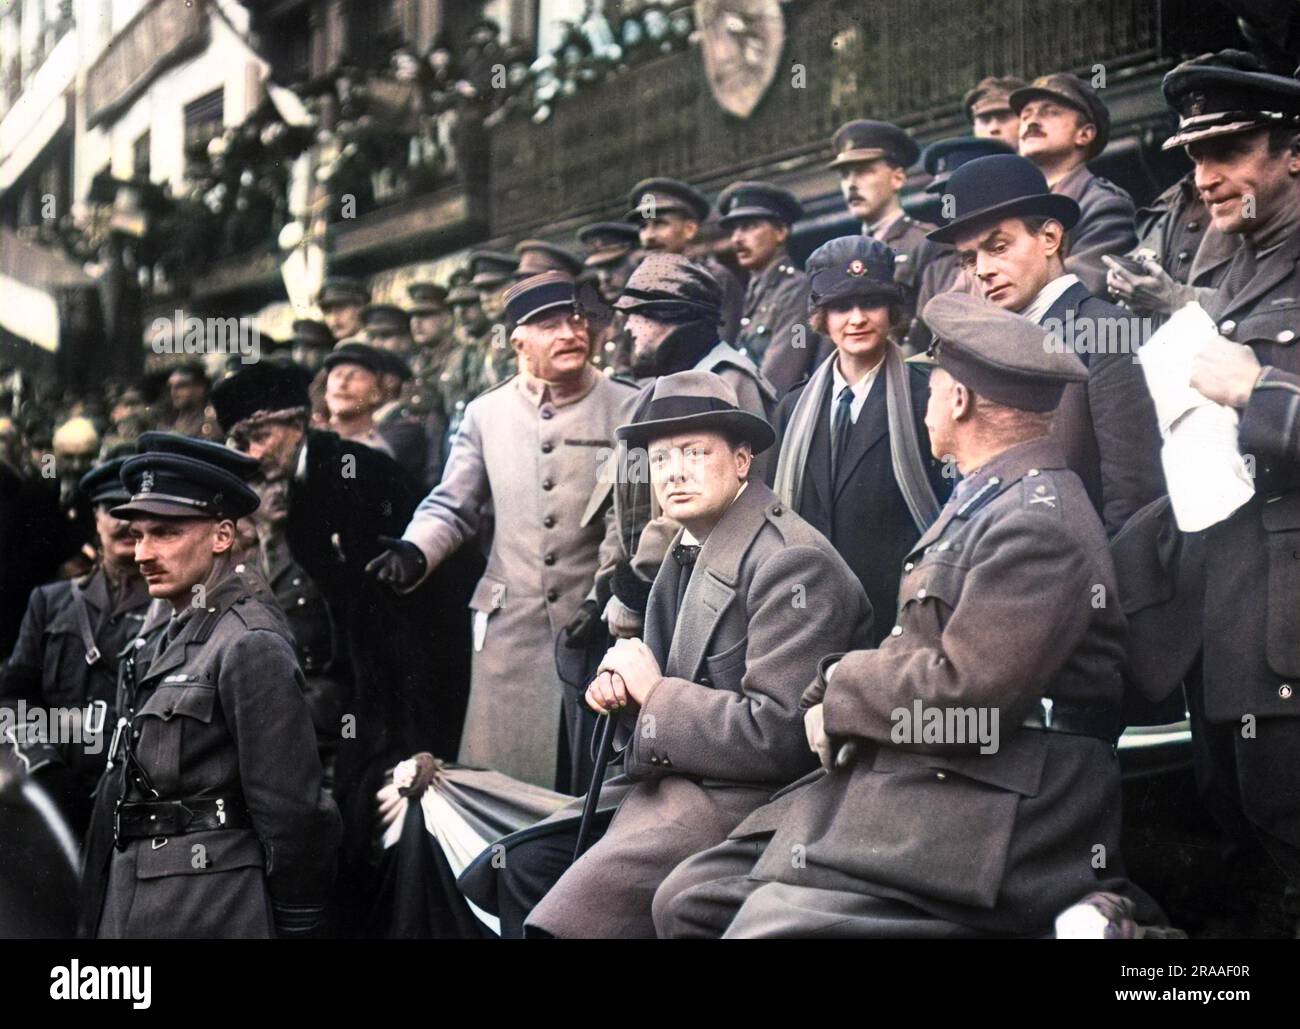 Winston Churchill as a War Office minister, sitting with others on a grandstand at Lille, France, watching the march past of the 47th (2nd London) Division who liberated Lille from German occupation on 17 October 1918, towards the end of the First World War.     Date: 1918 Stock Photo